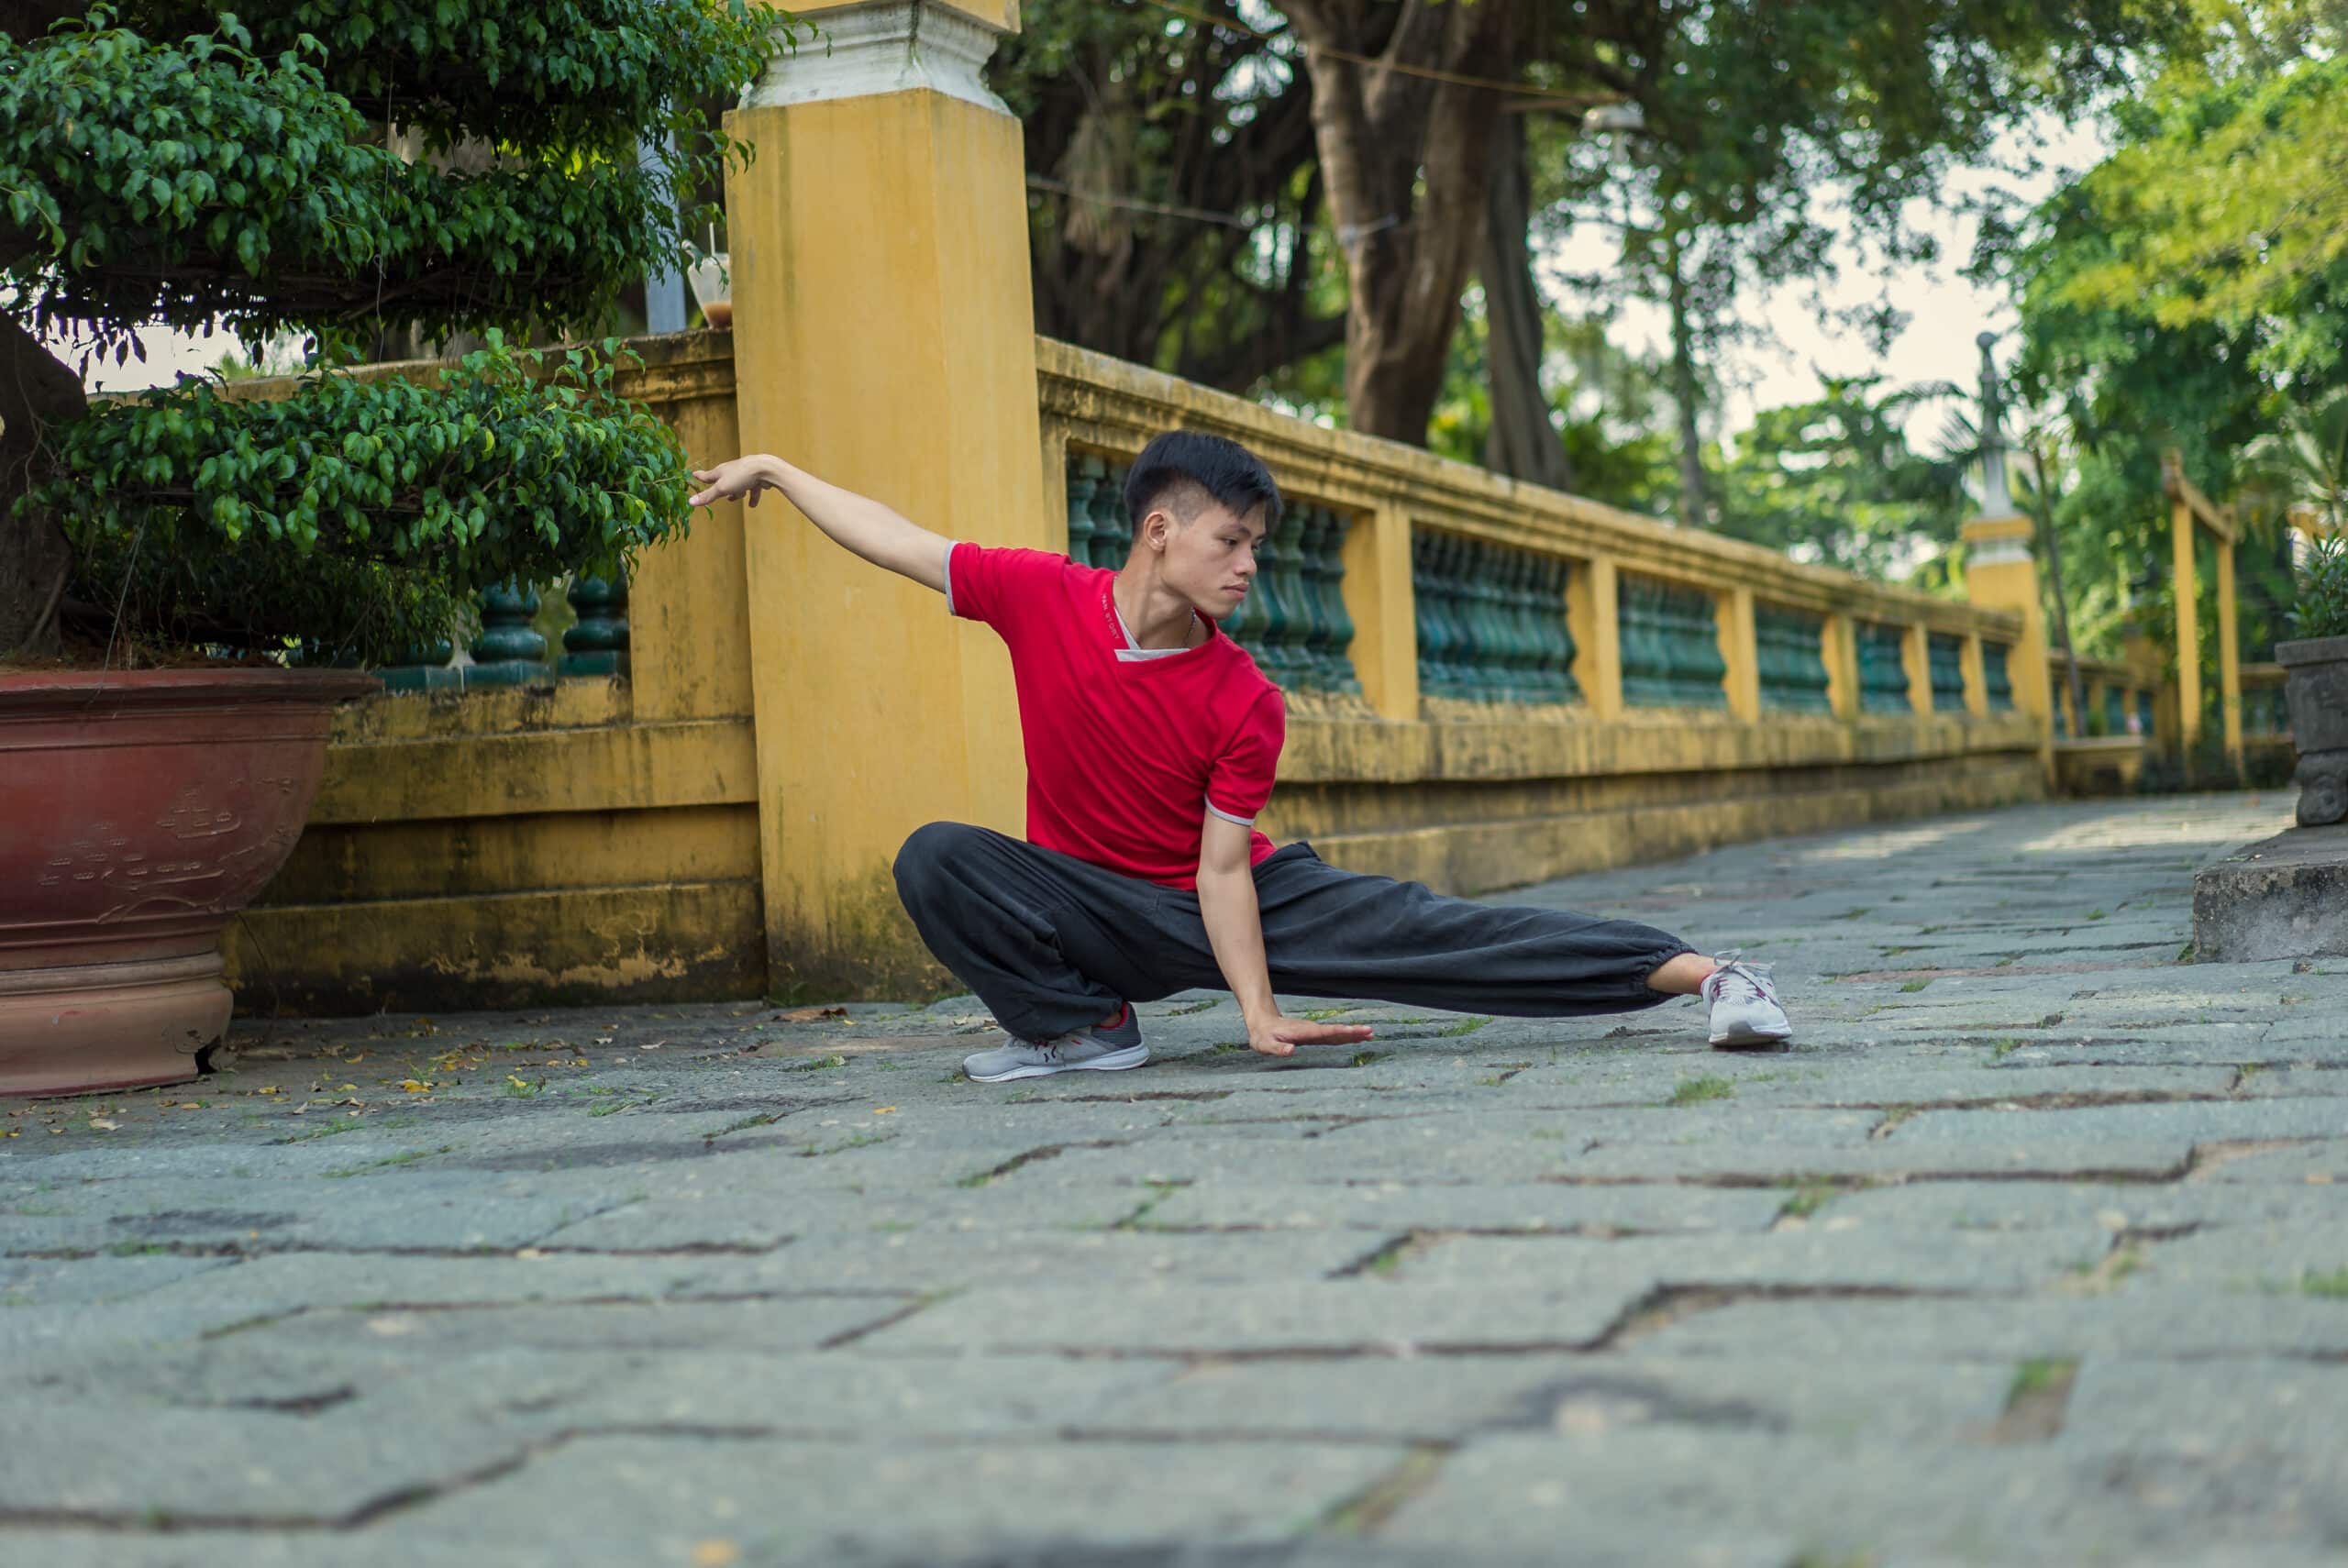 A boy in red shirt practicing snake qigong in the park